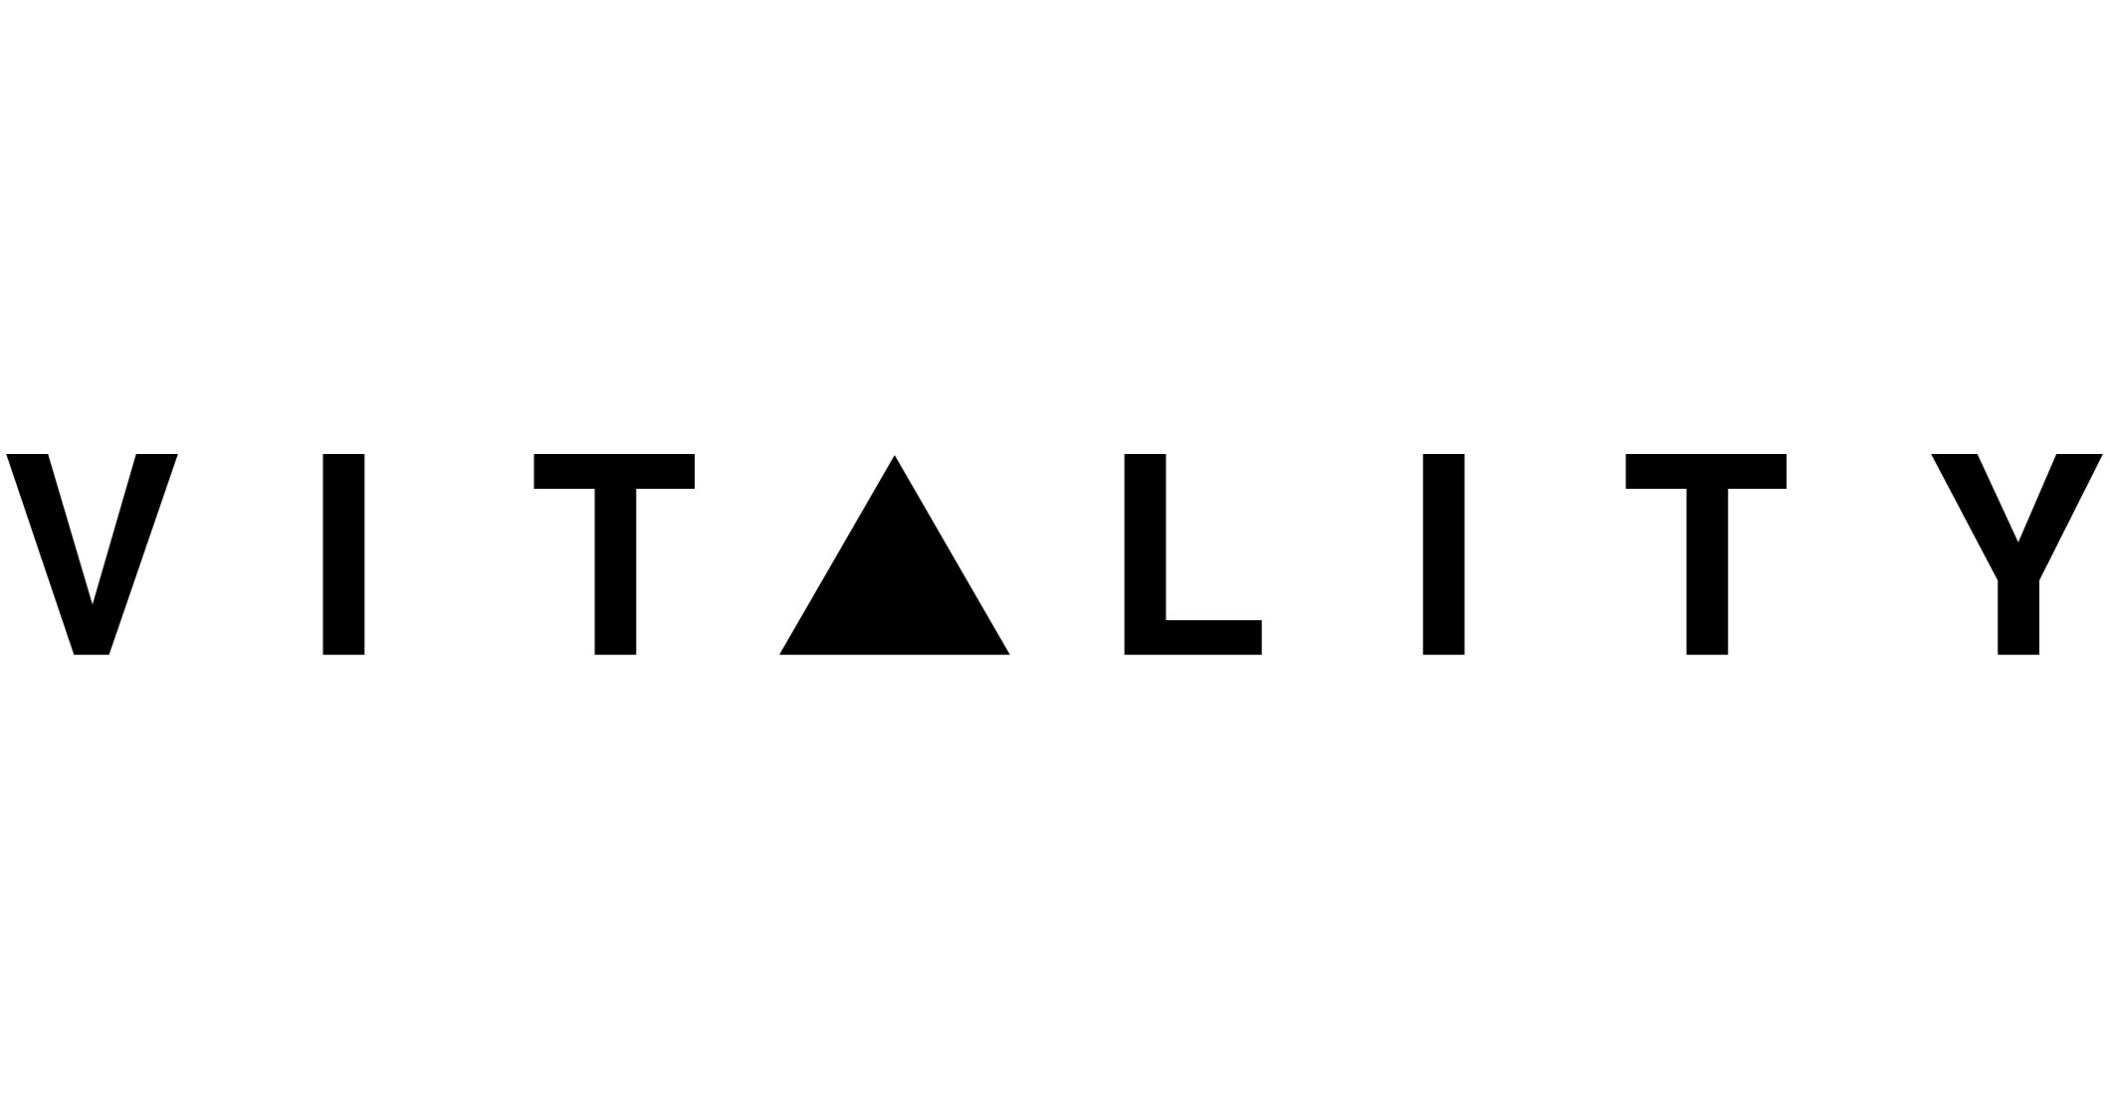 BALANCE ATHLETICA ANNOUNCES BRAND REFRESH, INCLUDING UNVEIL OF NEW NAME:  VITALITY